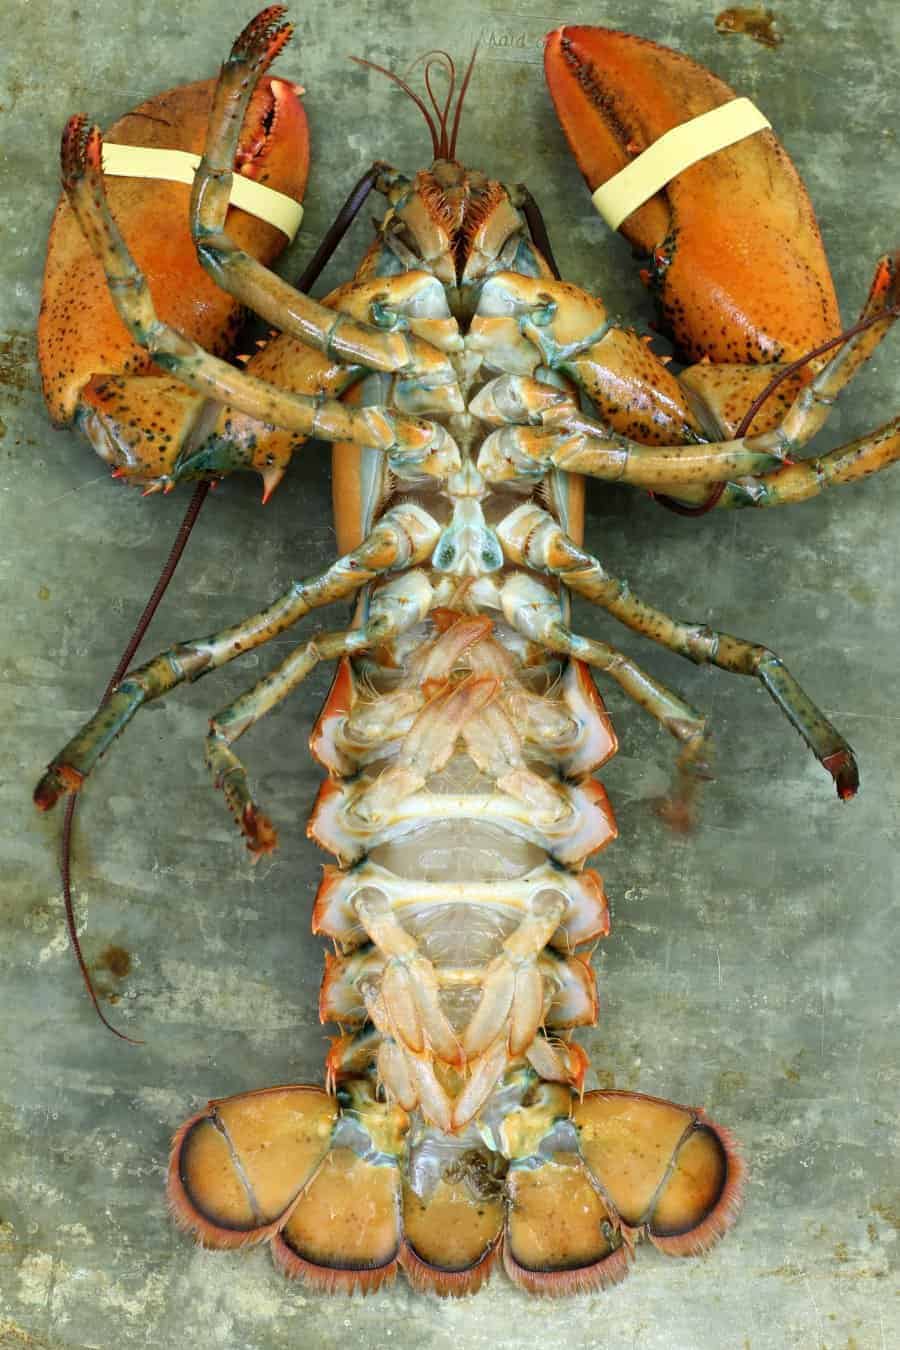 a female lobster on its back for easy identification